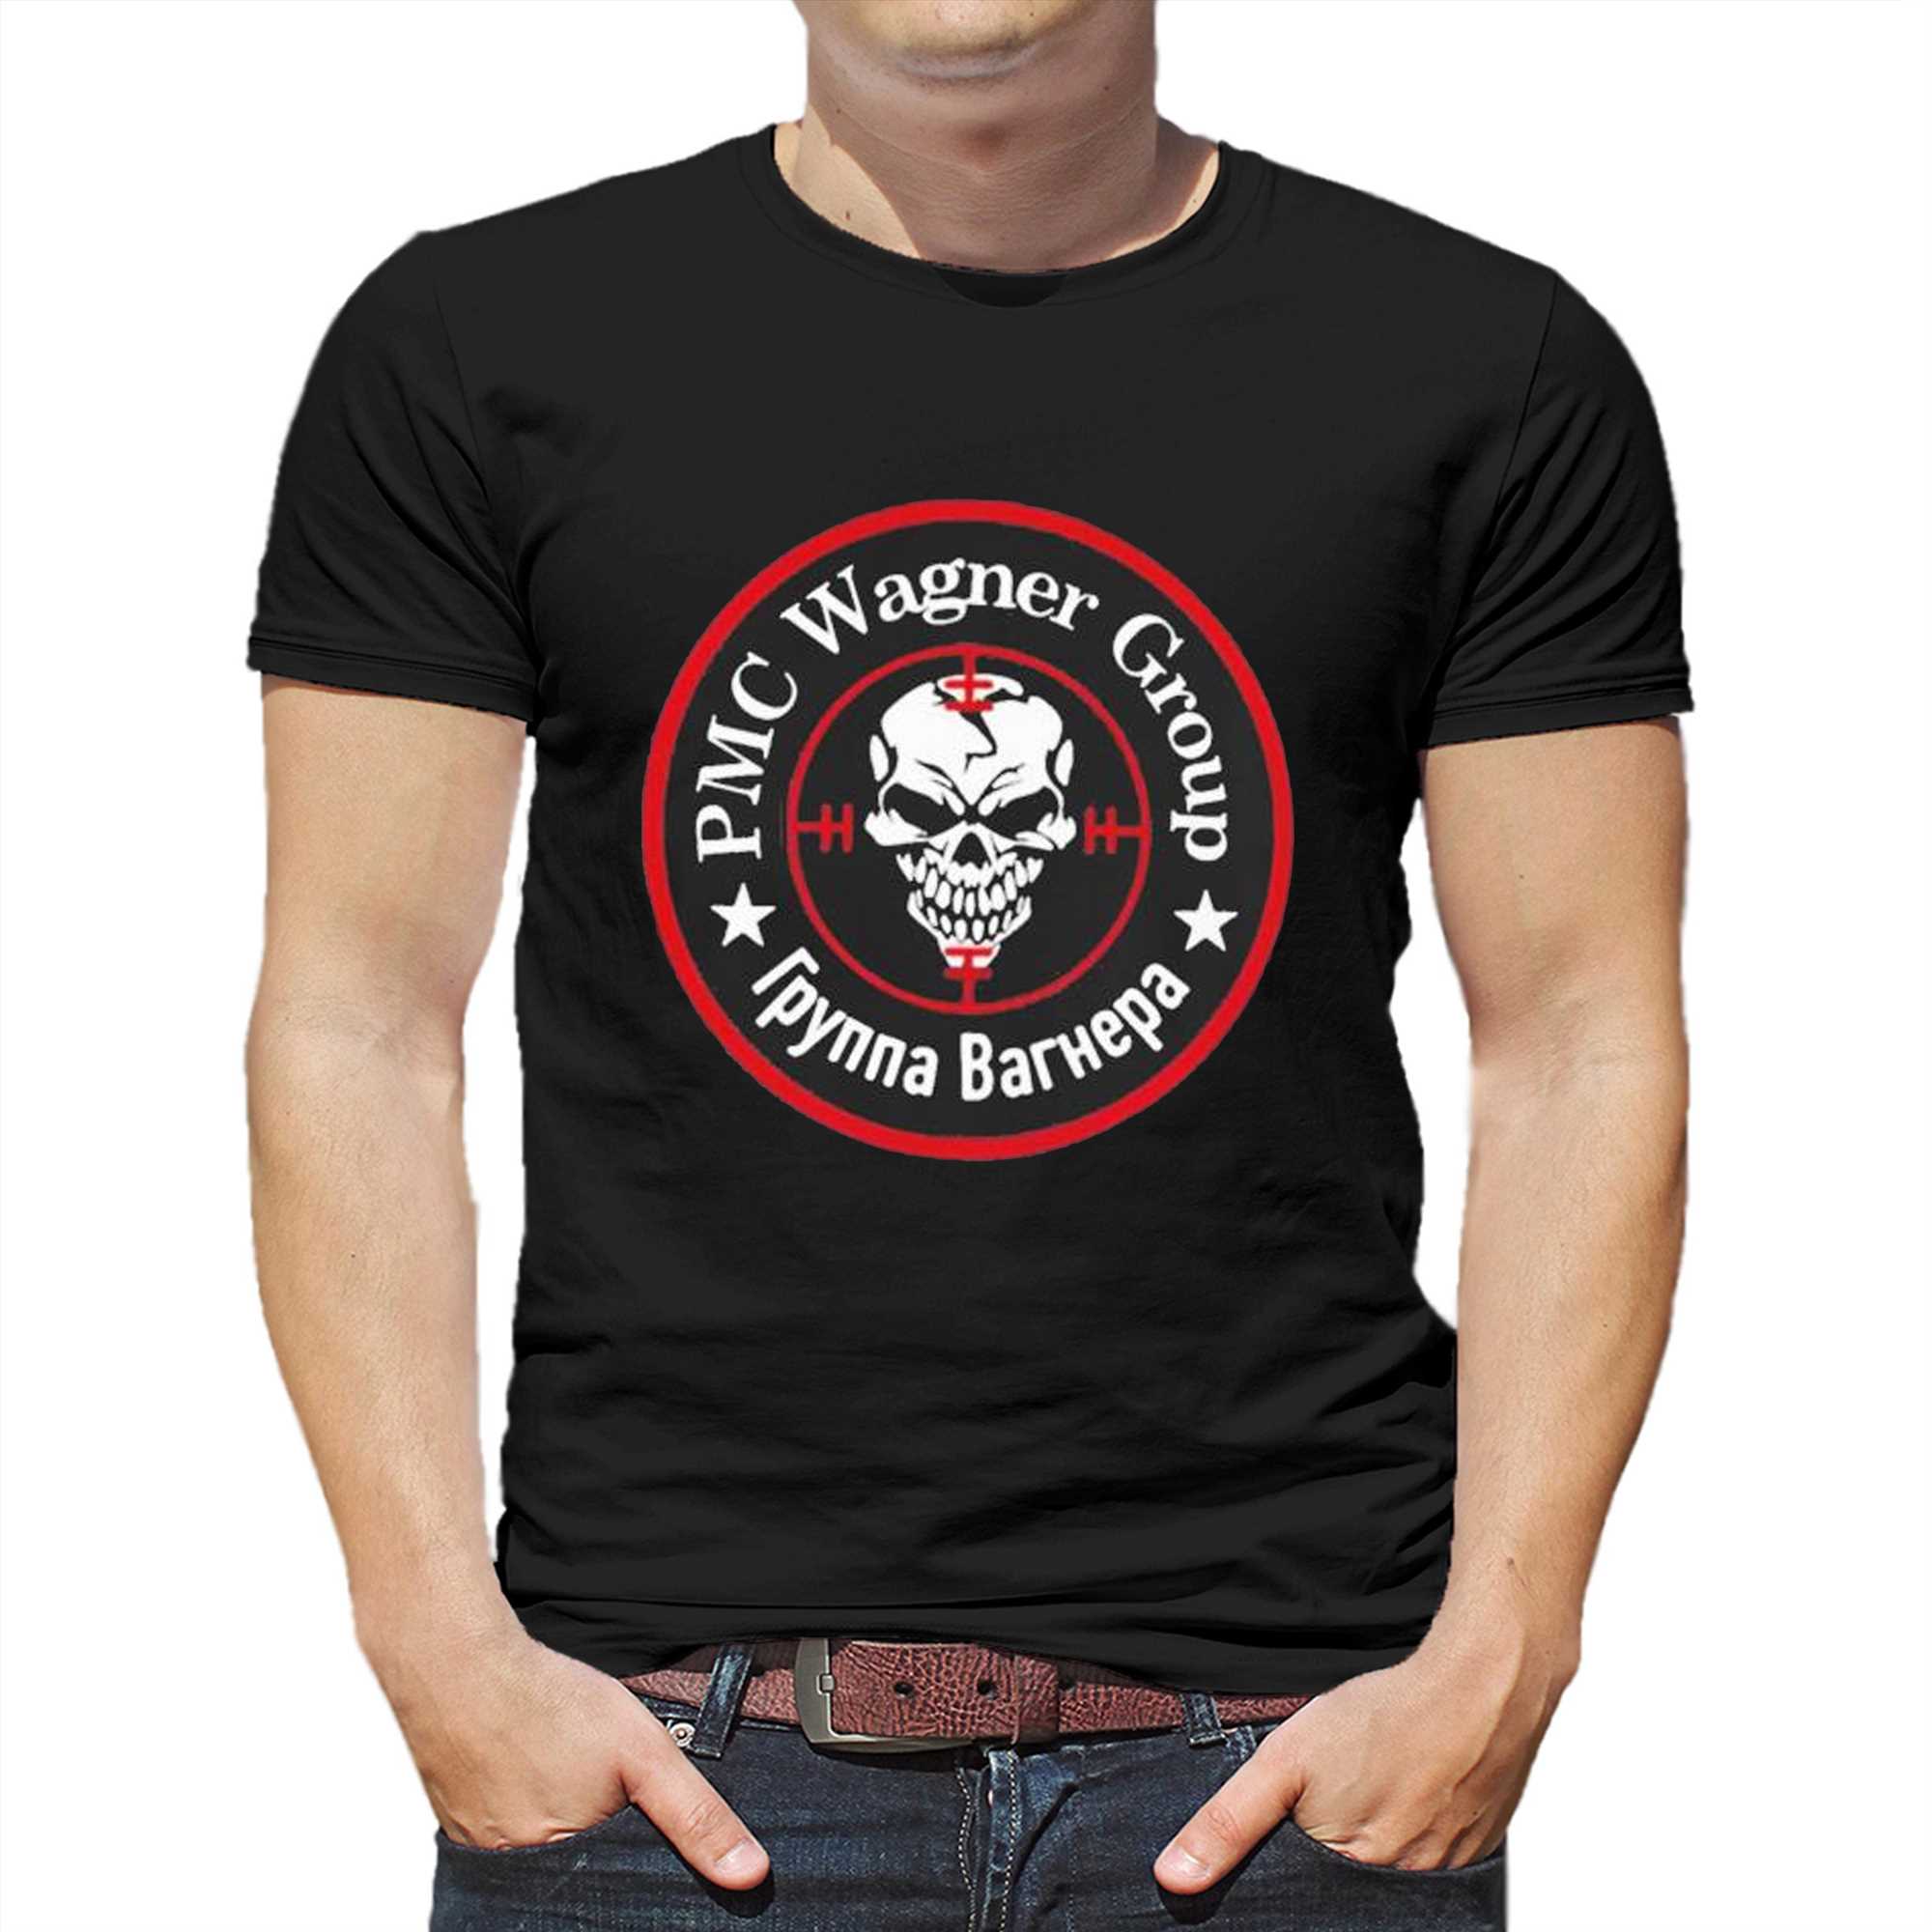 Official Majice Adrenalin Pmc Wagner Group T-shirt - Shibtee Clothing